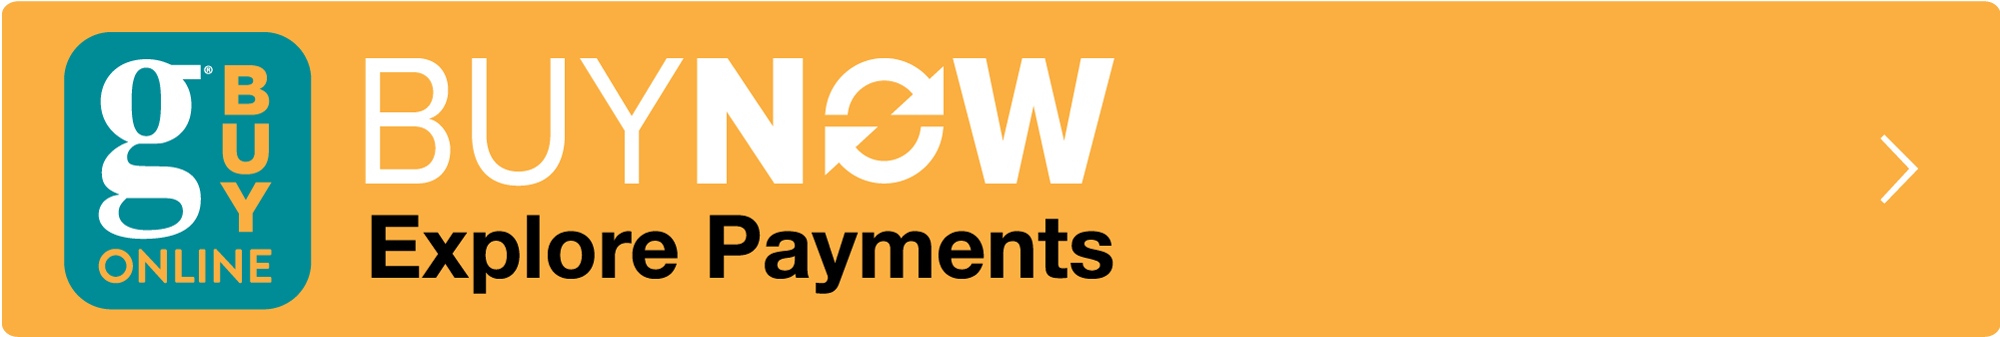 BuyNow Explore Payments